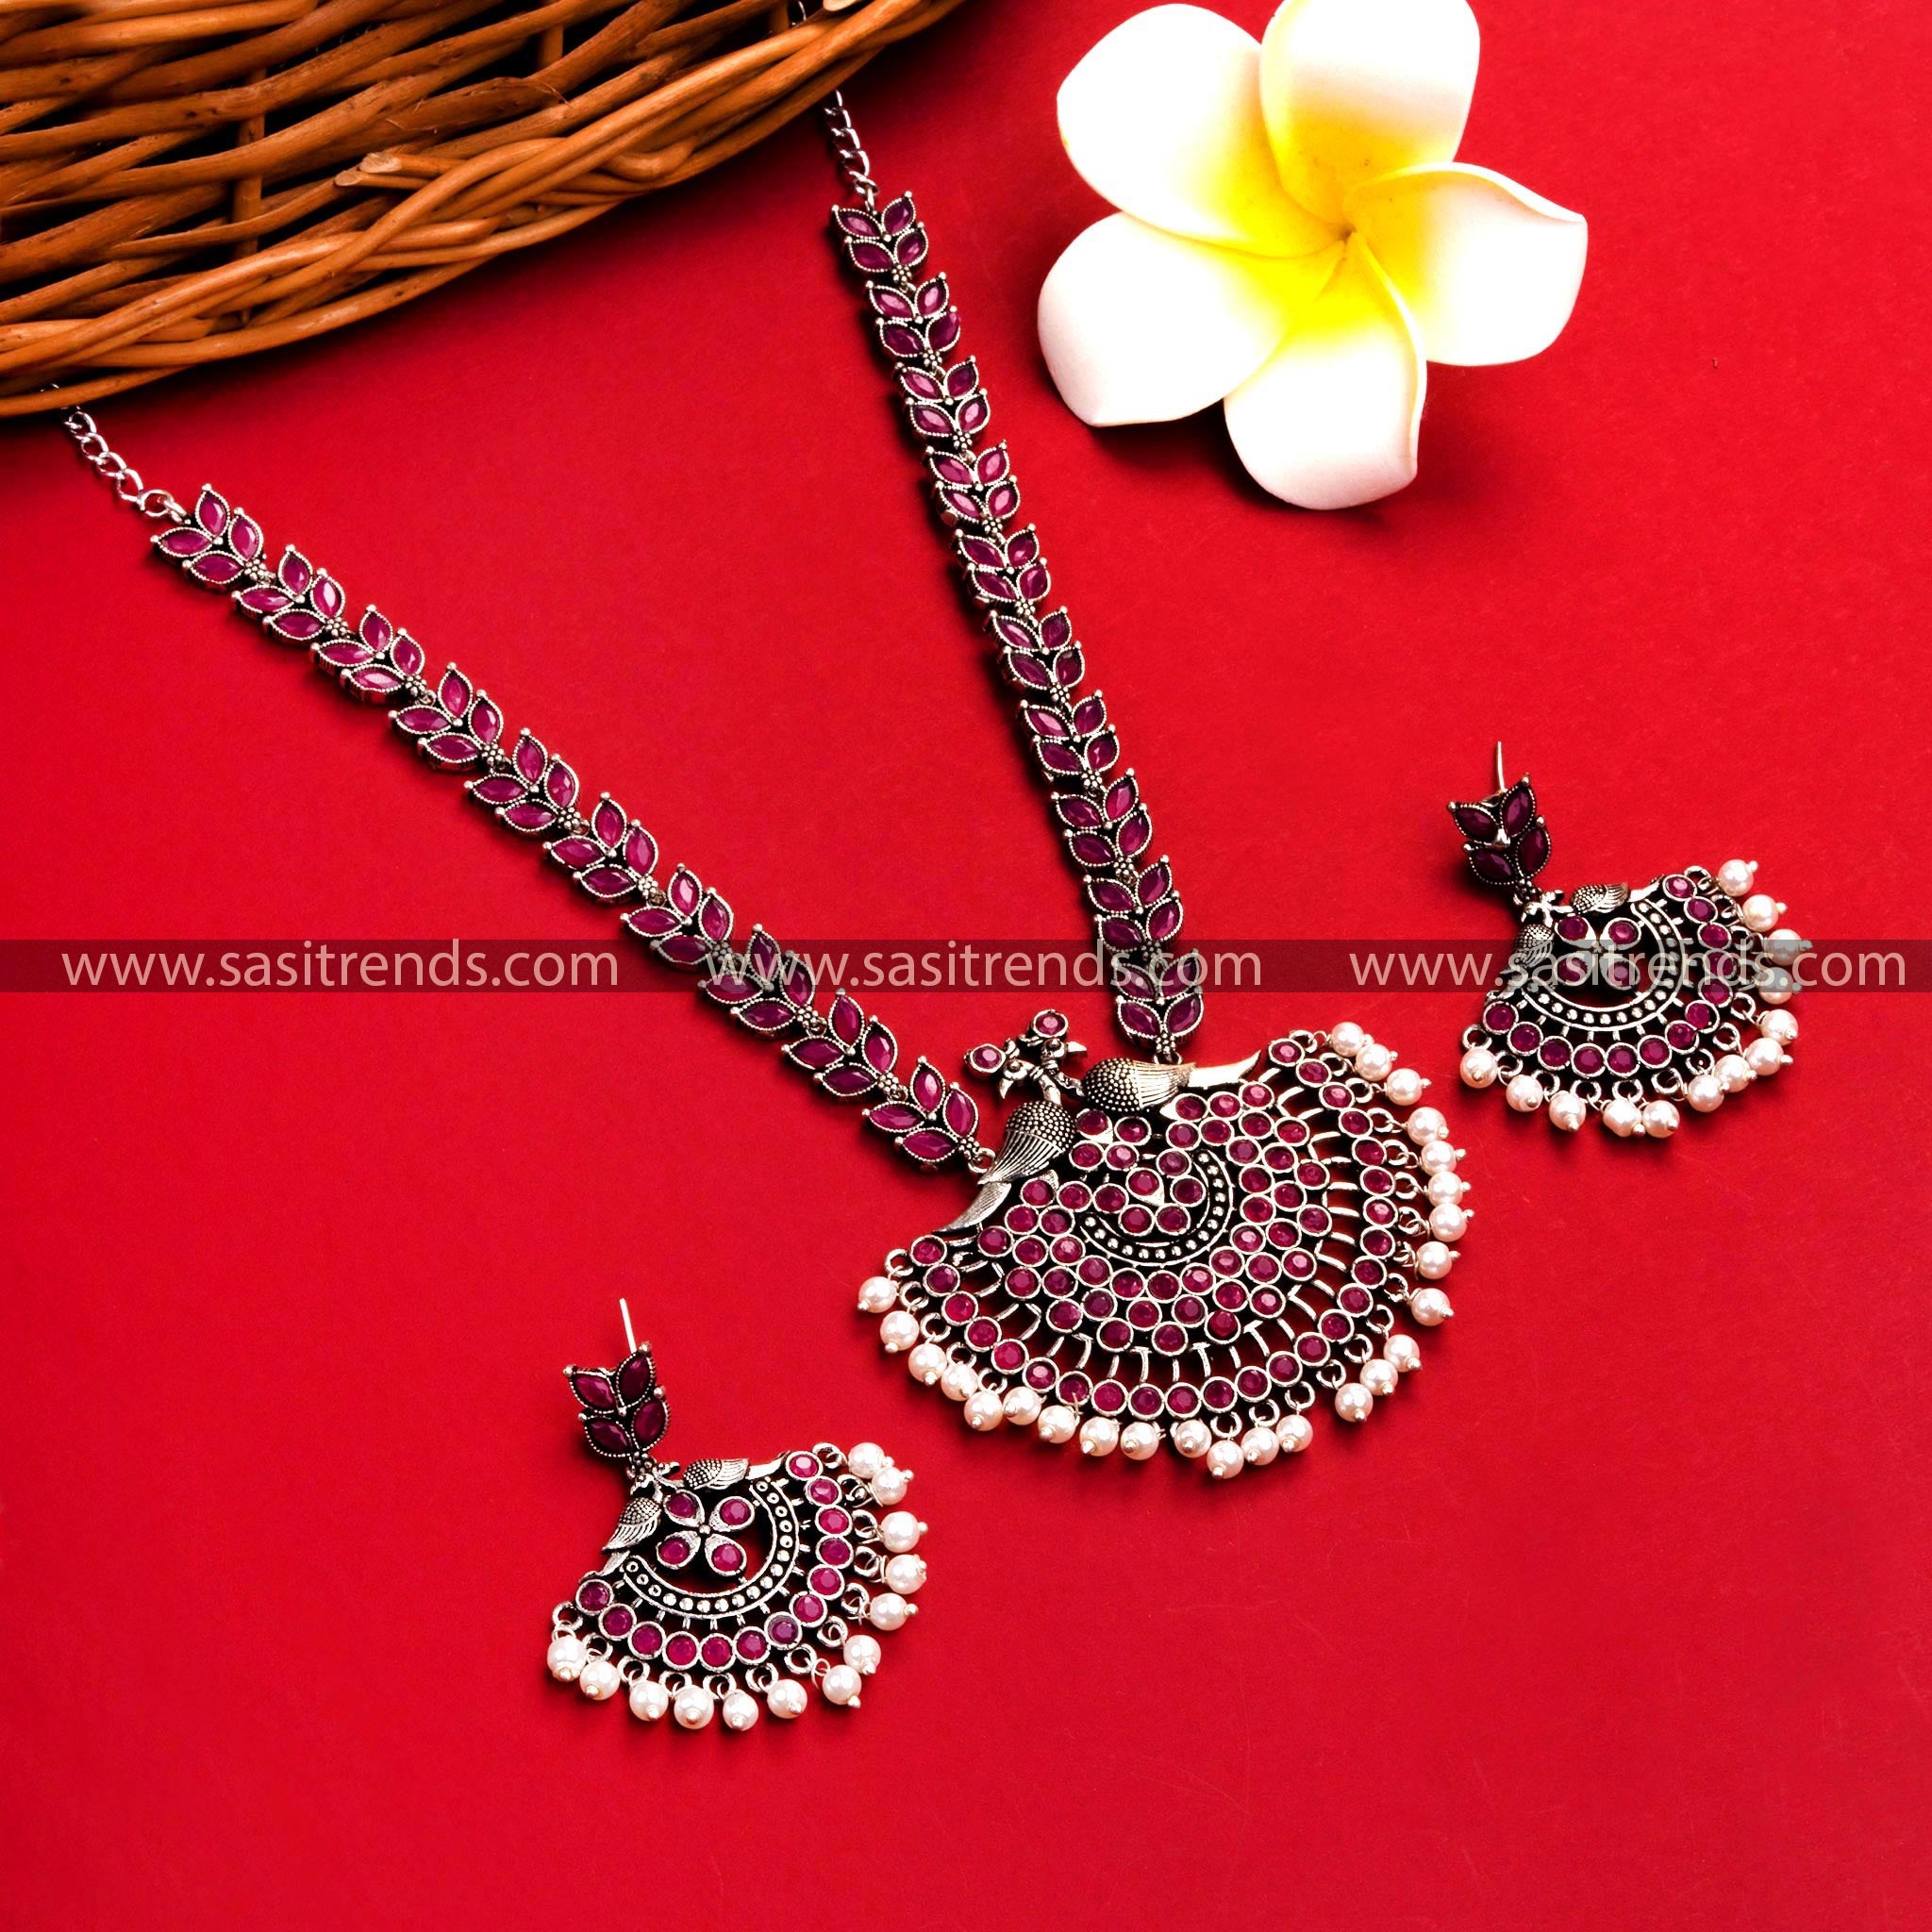 Buy Handcrafted Antique German Silver Necklace from Afghanistan